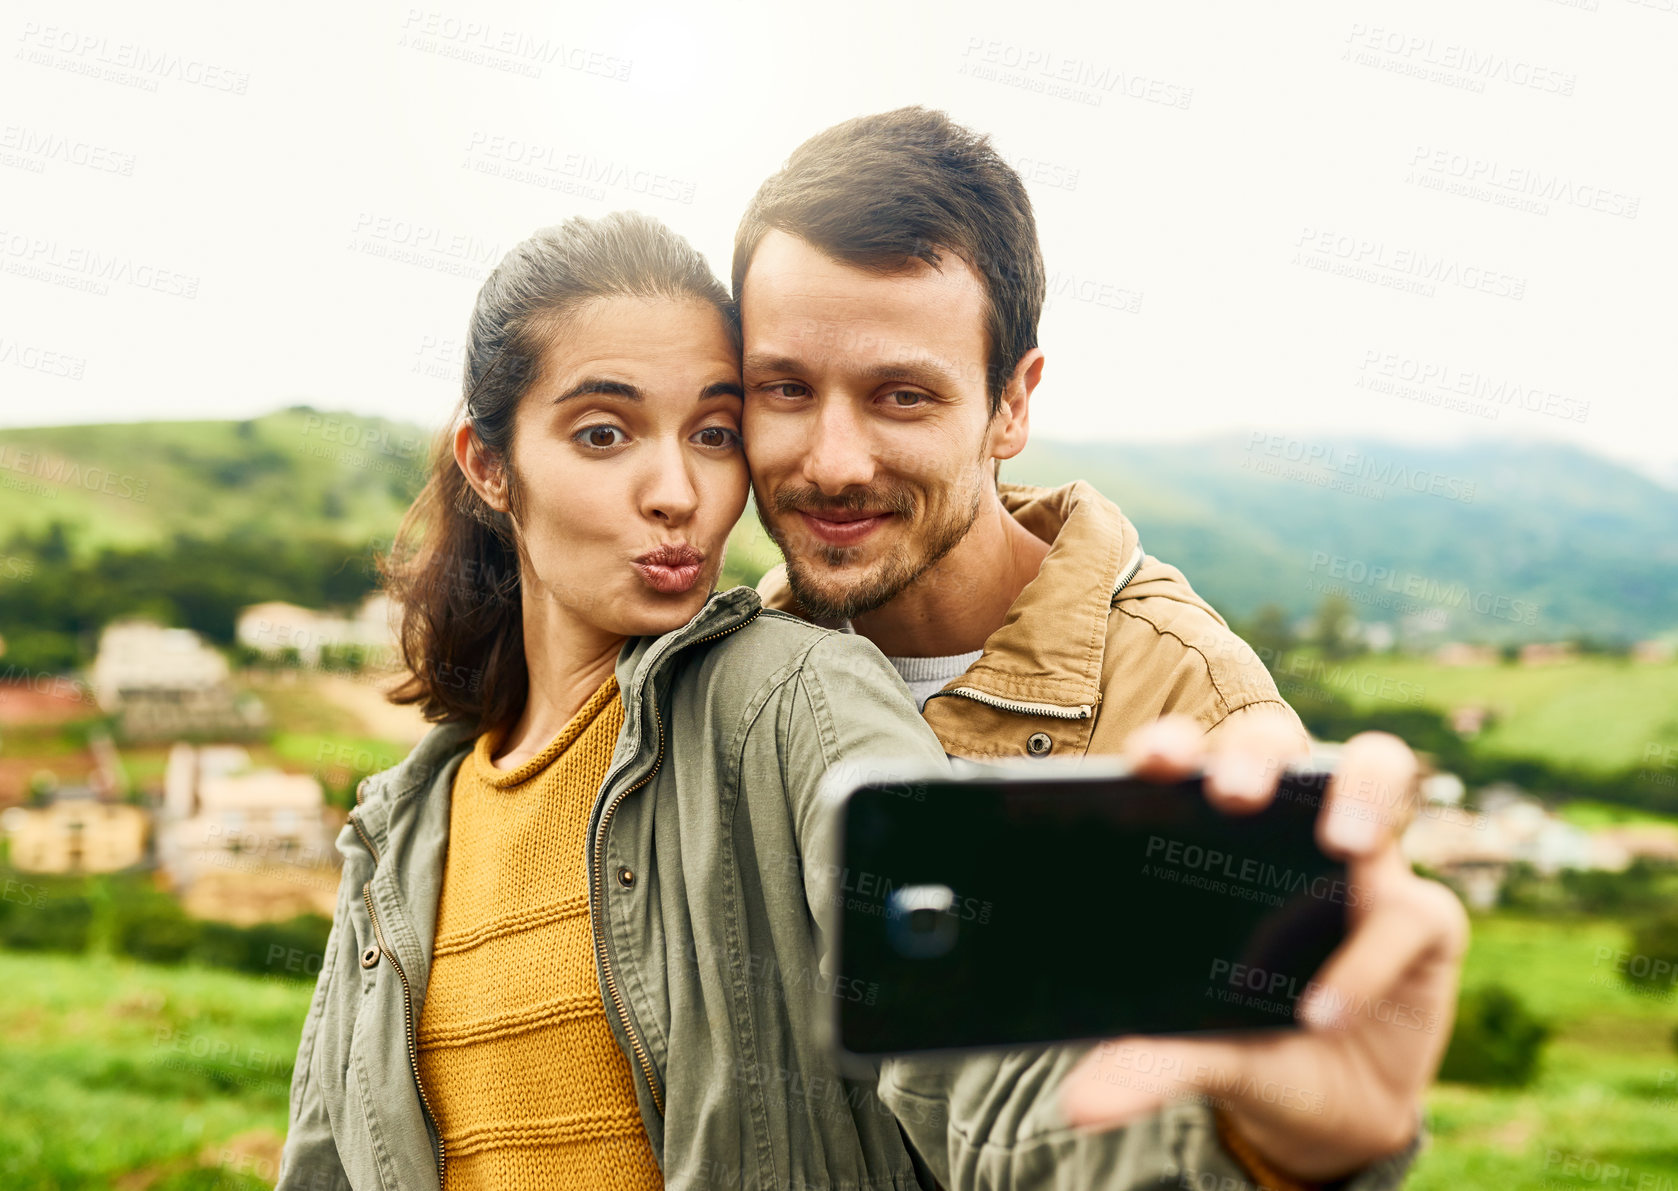 Buy stock photo Cropped shot of a loving couple taking a selfie outdoors